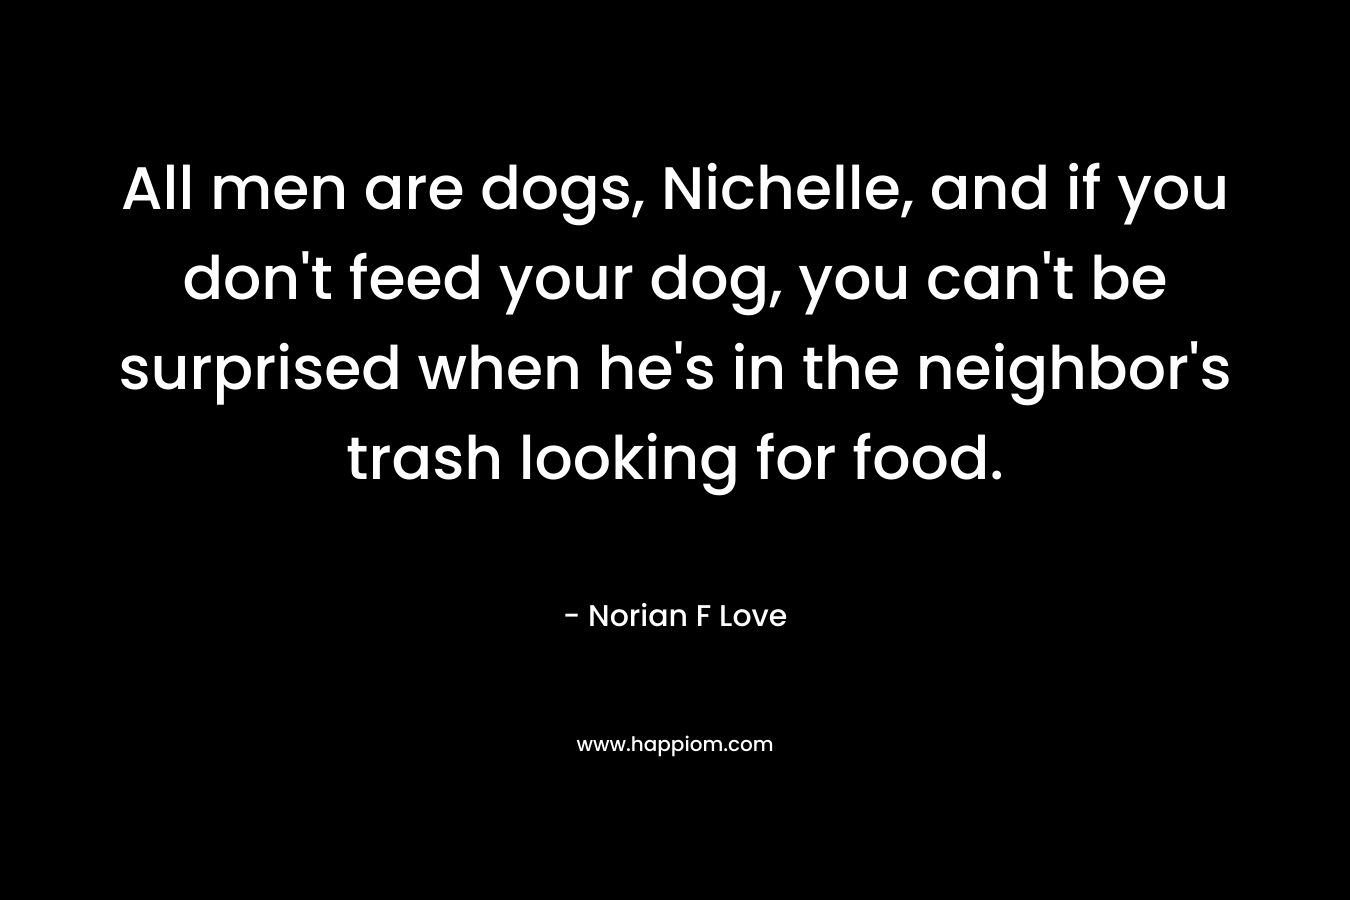 All men are dogs, Nichelle, and if you don't feed your dog, you can't be surprised when he's in the neighbor's trash looking for food.